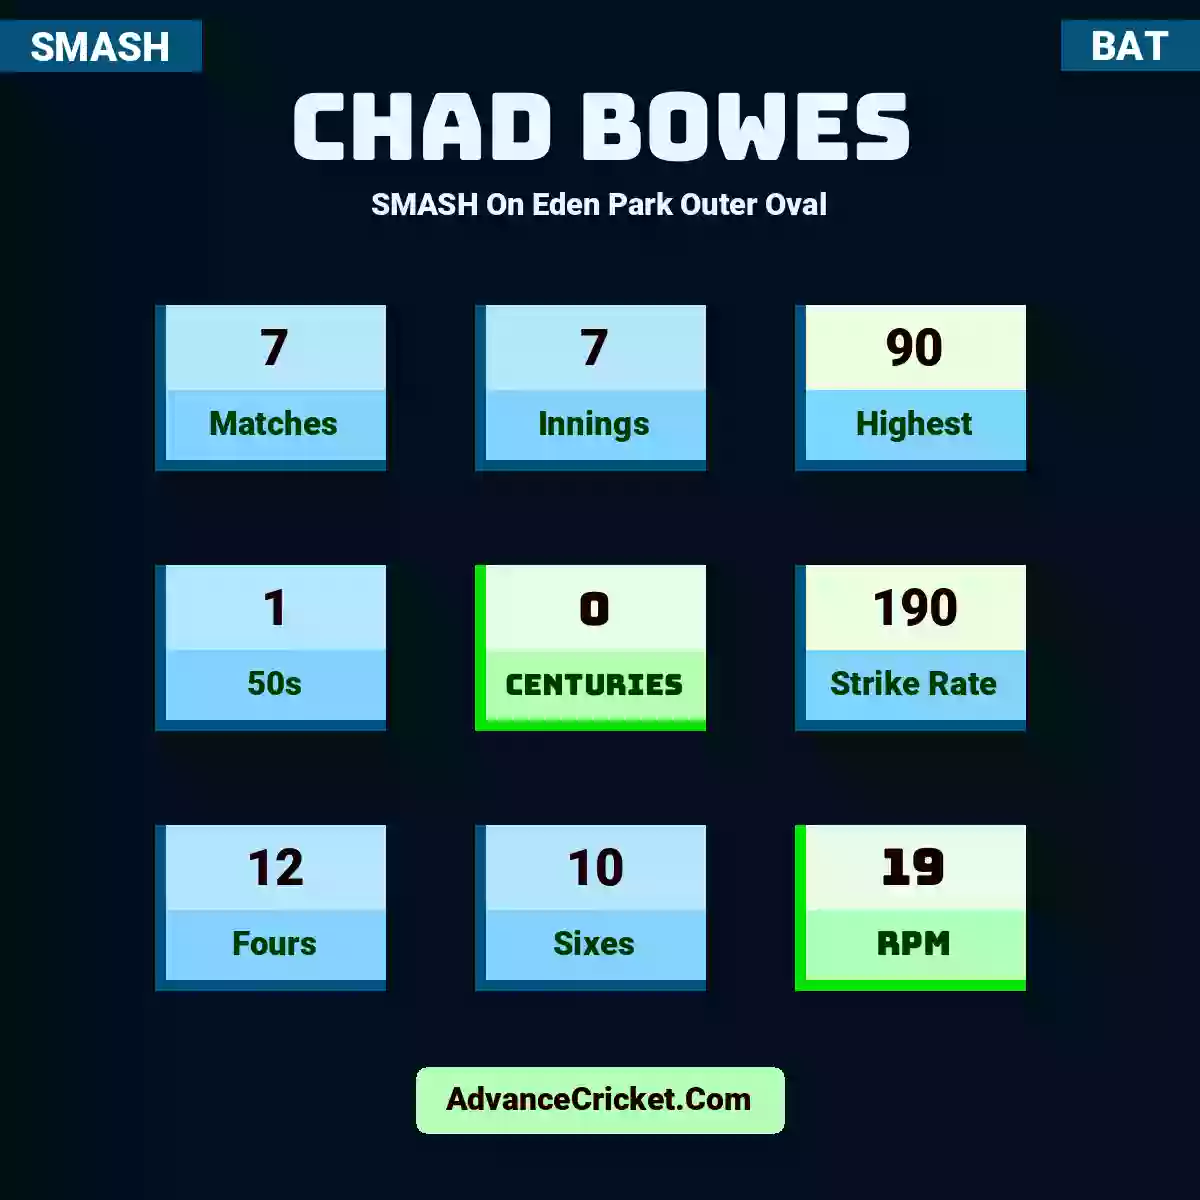 Chad Bowes SMASH  On Eden Park Outer Oval, Chad Bowes played 7 matches, scored 90 runs as highest, 1 half-centuries, and 0 centuries, with a strike rate of 190. C.Bowes hit 12 fours and 10 sixes, with an RPM of 19.